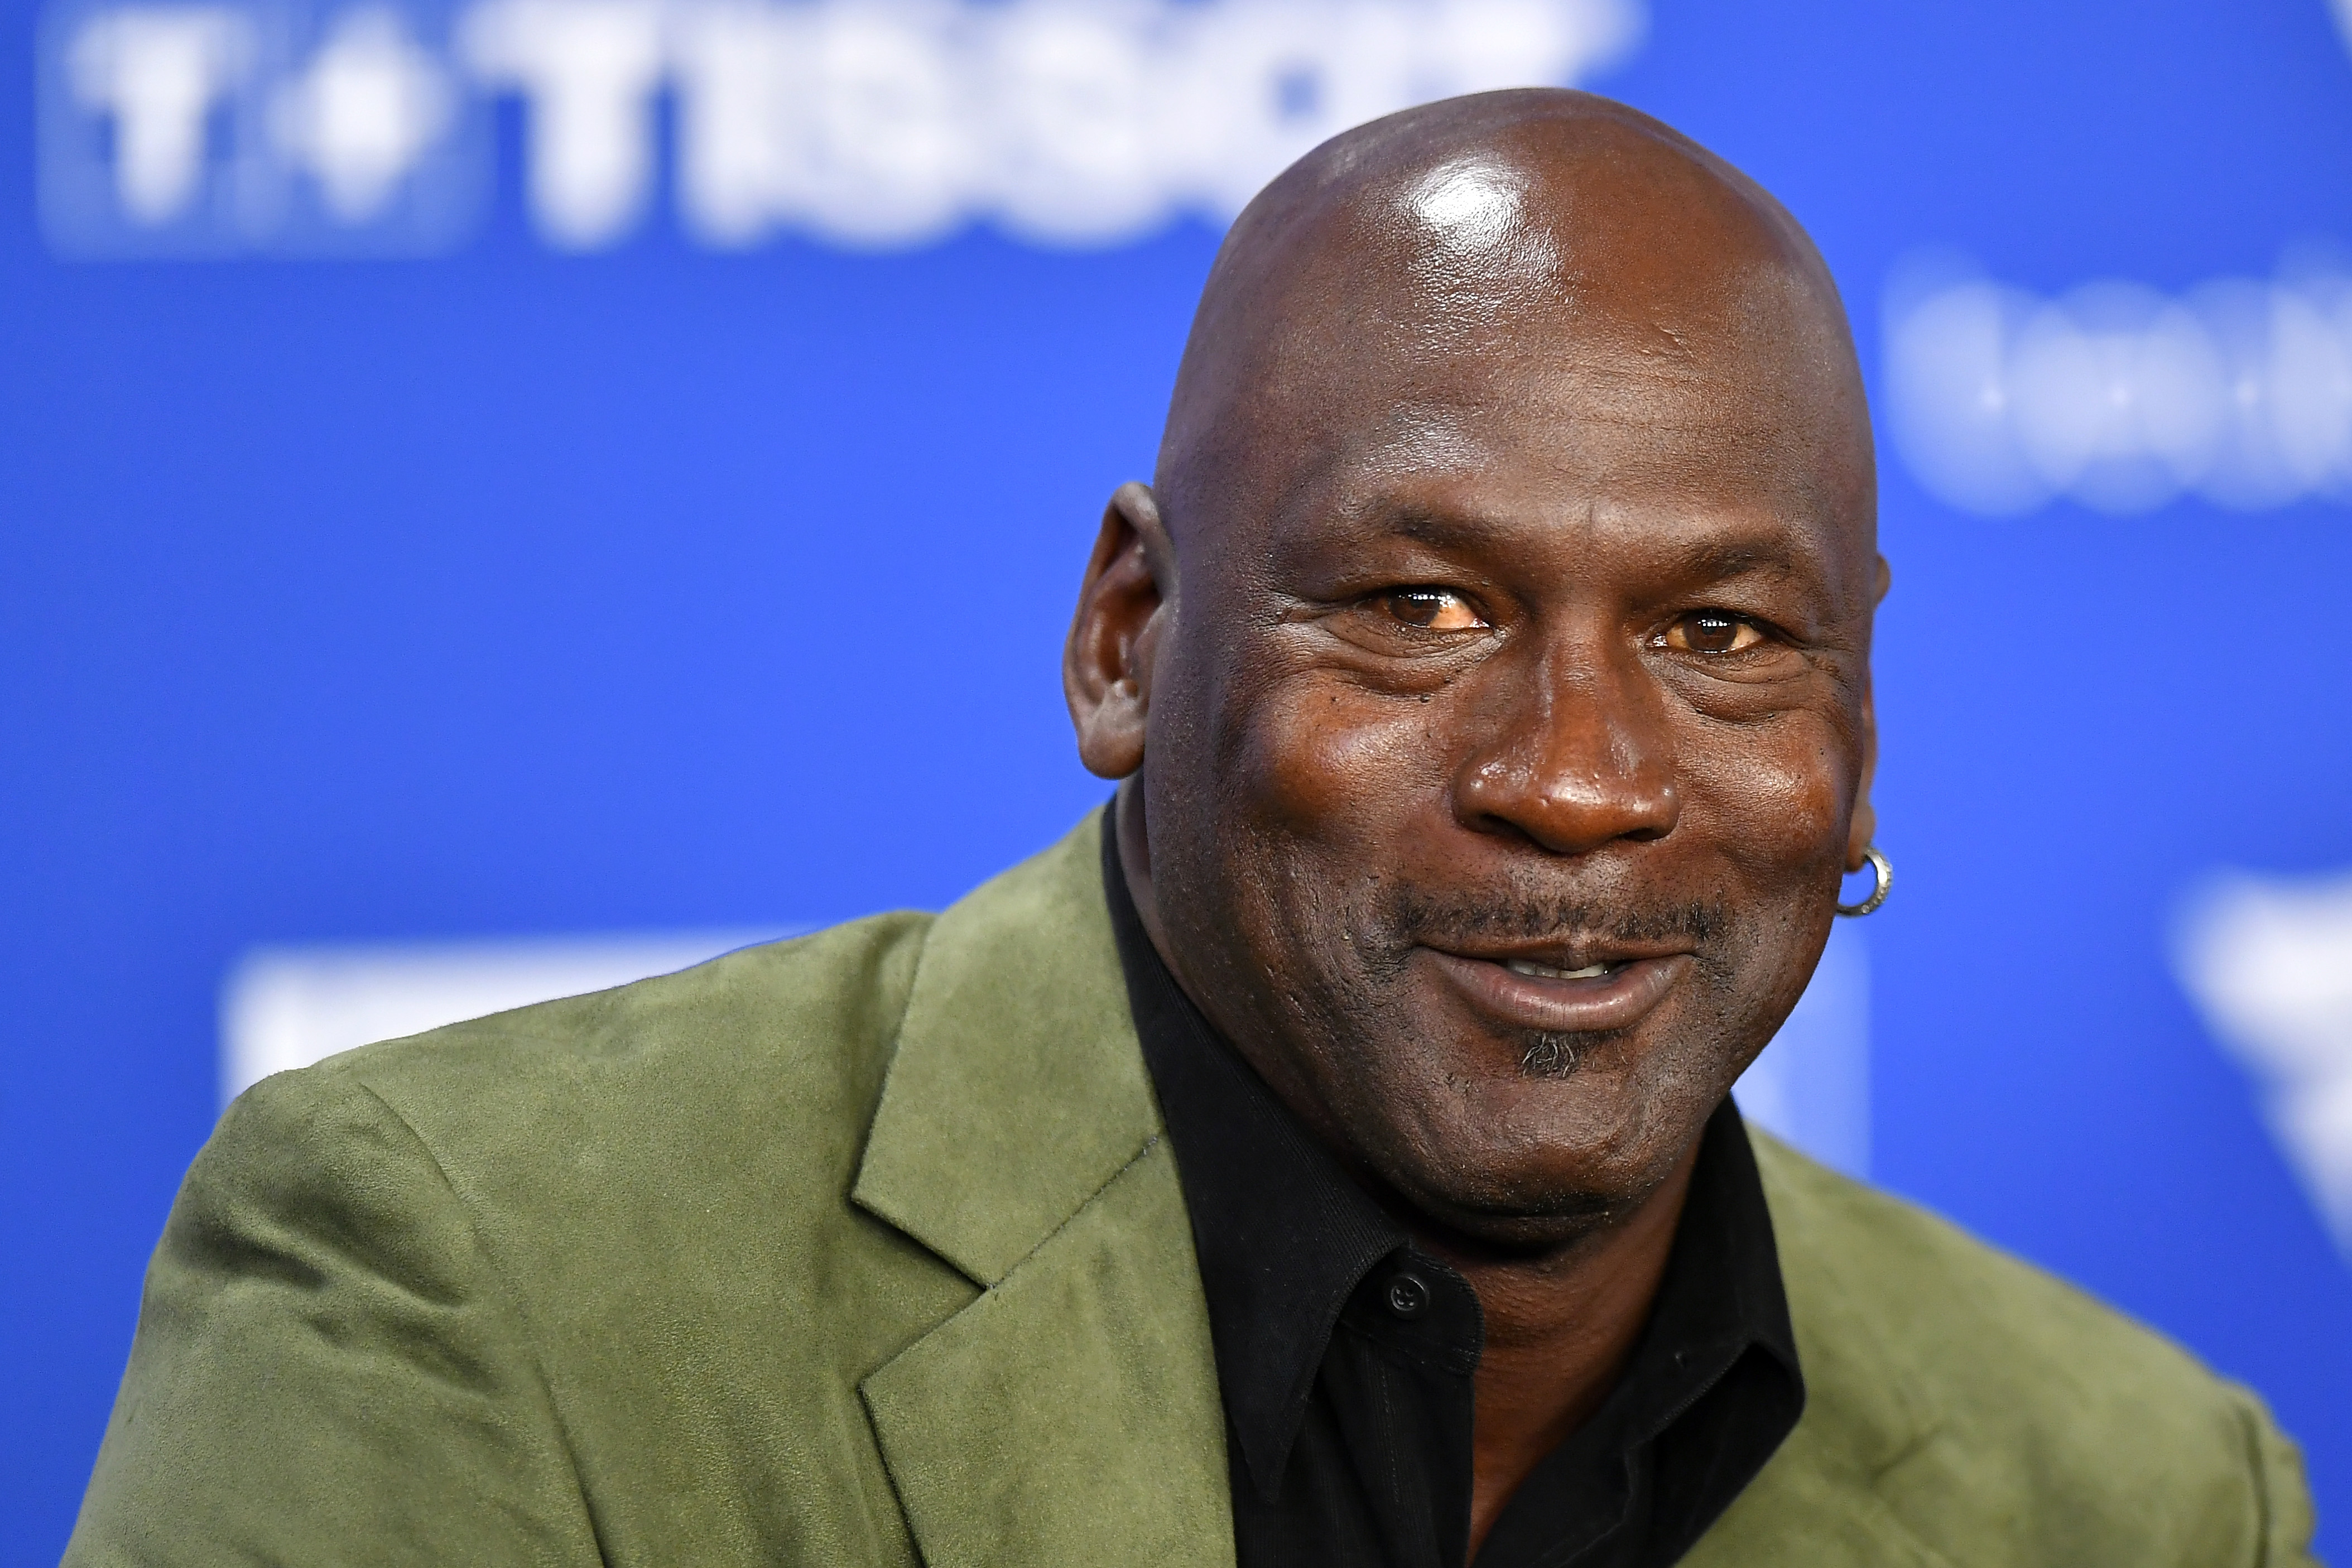 Michael Jordan attends a press conference before an NBA Paris match on January 24, 2020 in Paris, France  | Source: Getty Images